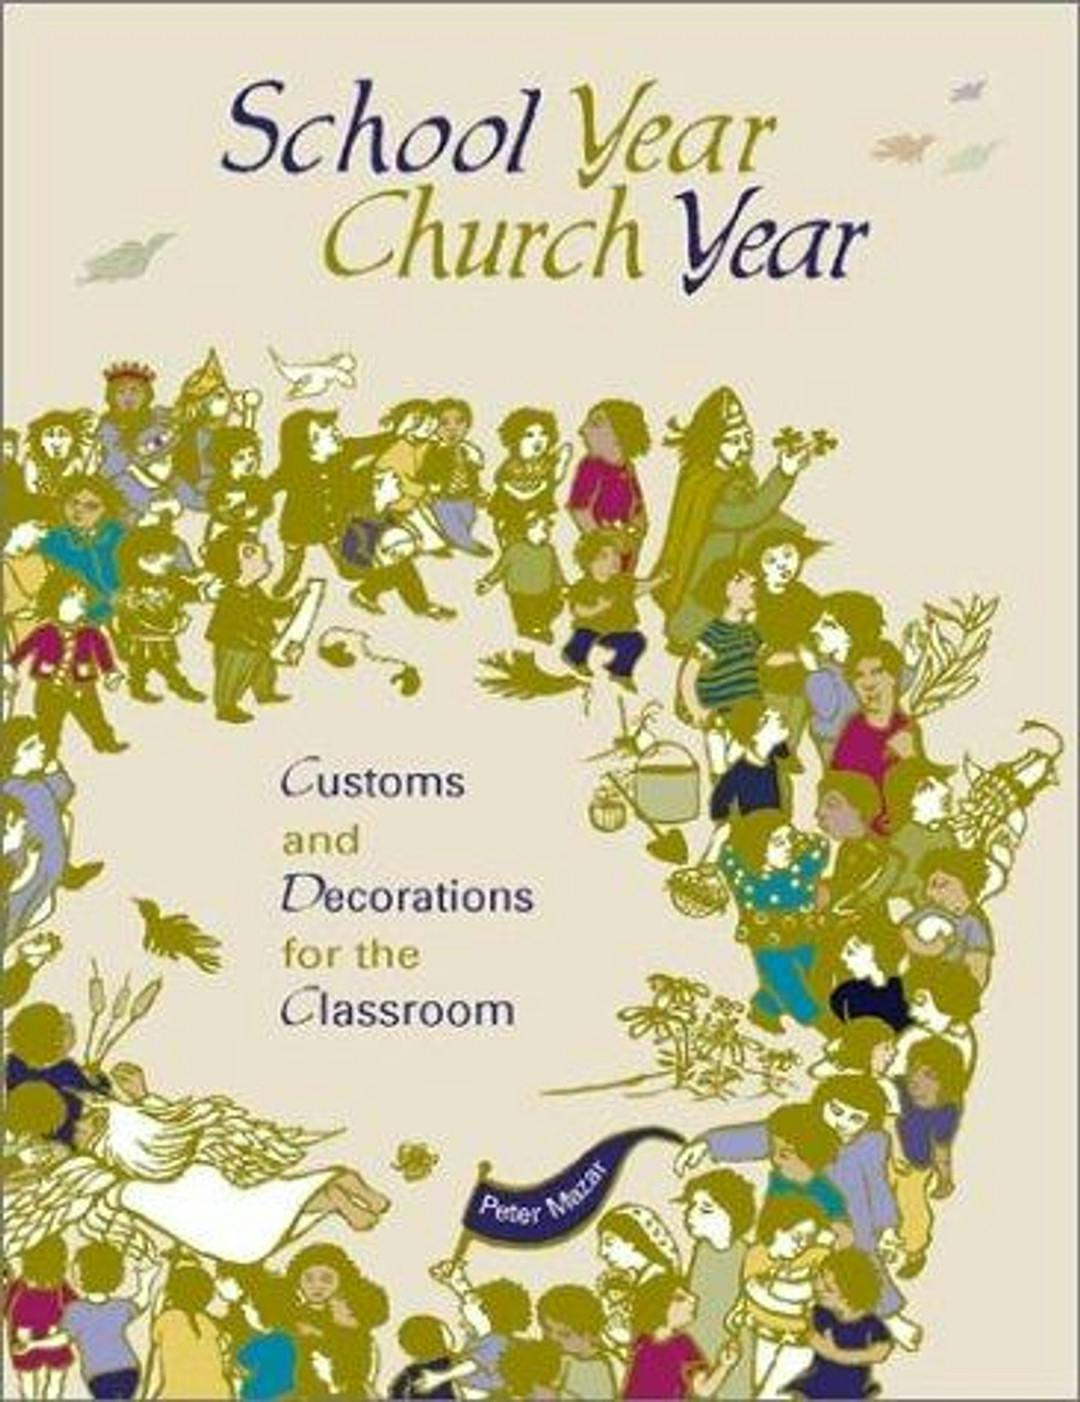 School Year, Church Year: Customs and Decorations for the Classroom